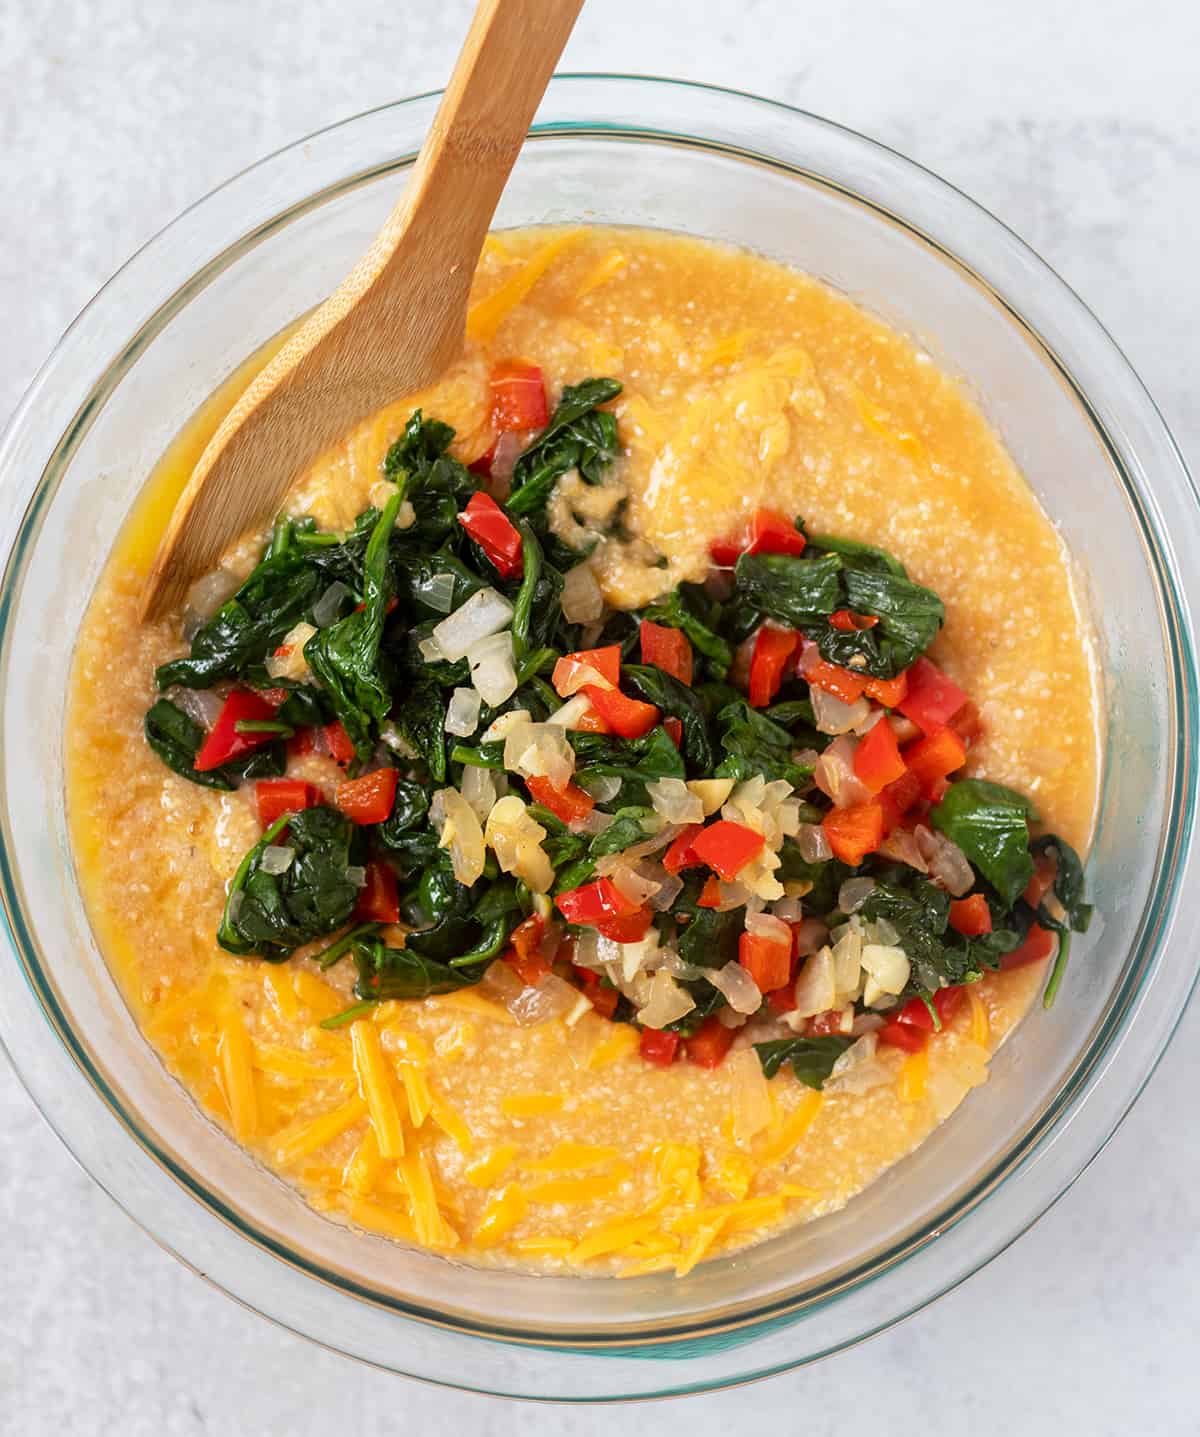 Cooked grits in mixing bowl with cooked veggies and remaining ingredients